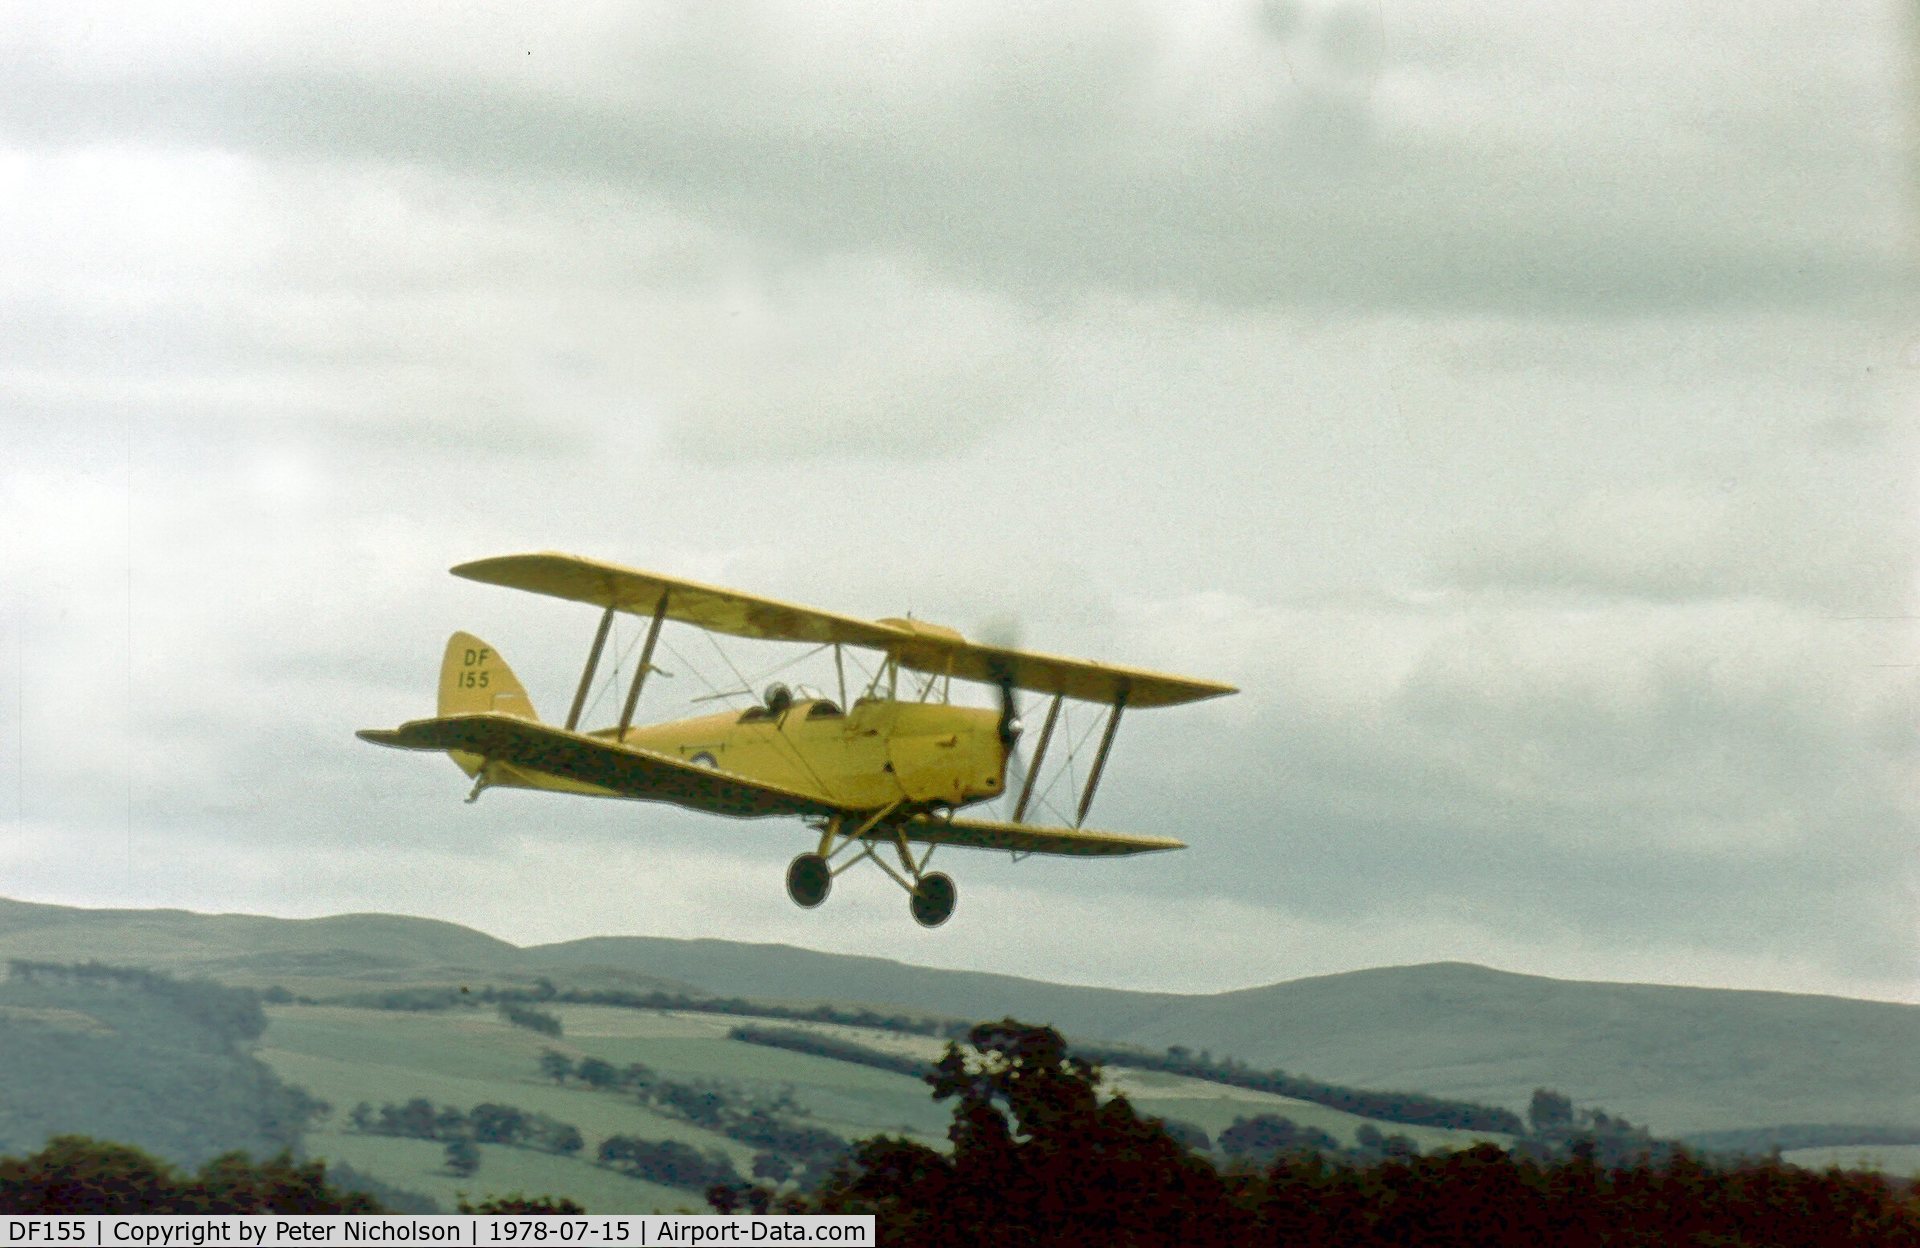 DF155, 1942 De Havilland DH-82A Tiger Moth II C/N 85904, One of the Strathallan Collection's Tiger Moth G-ANFV landing at the 1978 Strathallan Open Day.